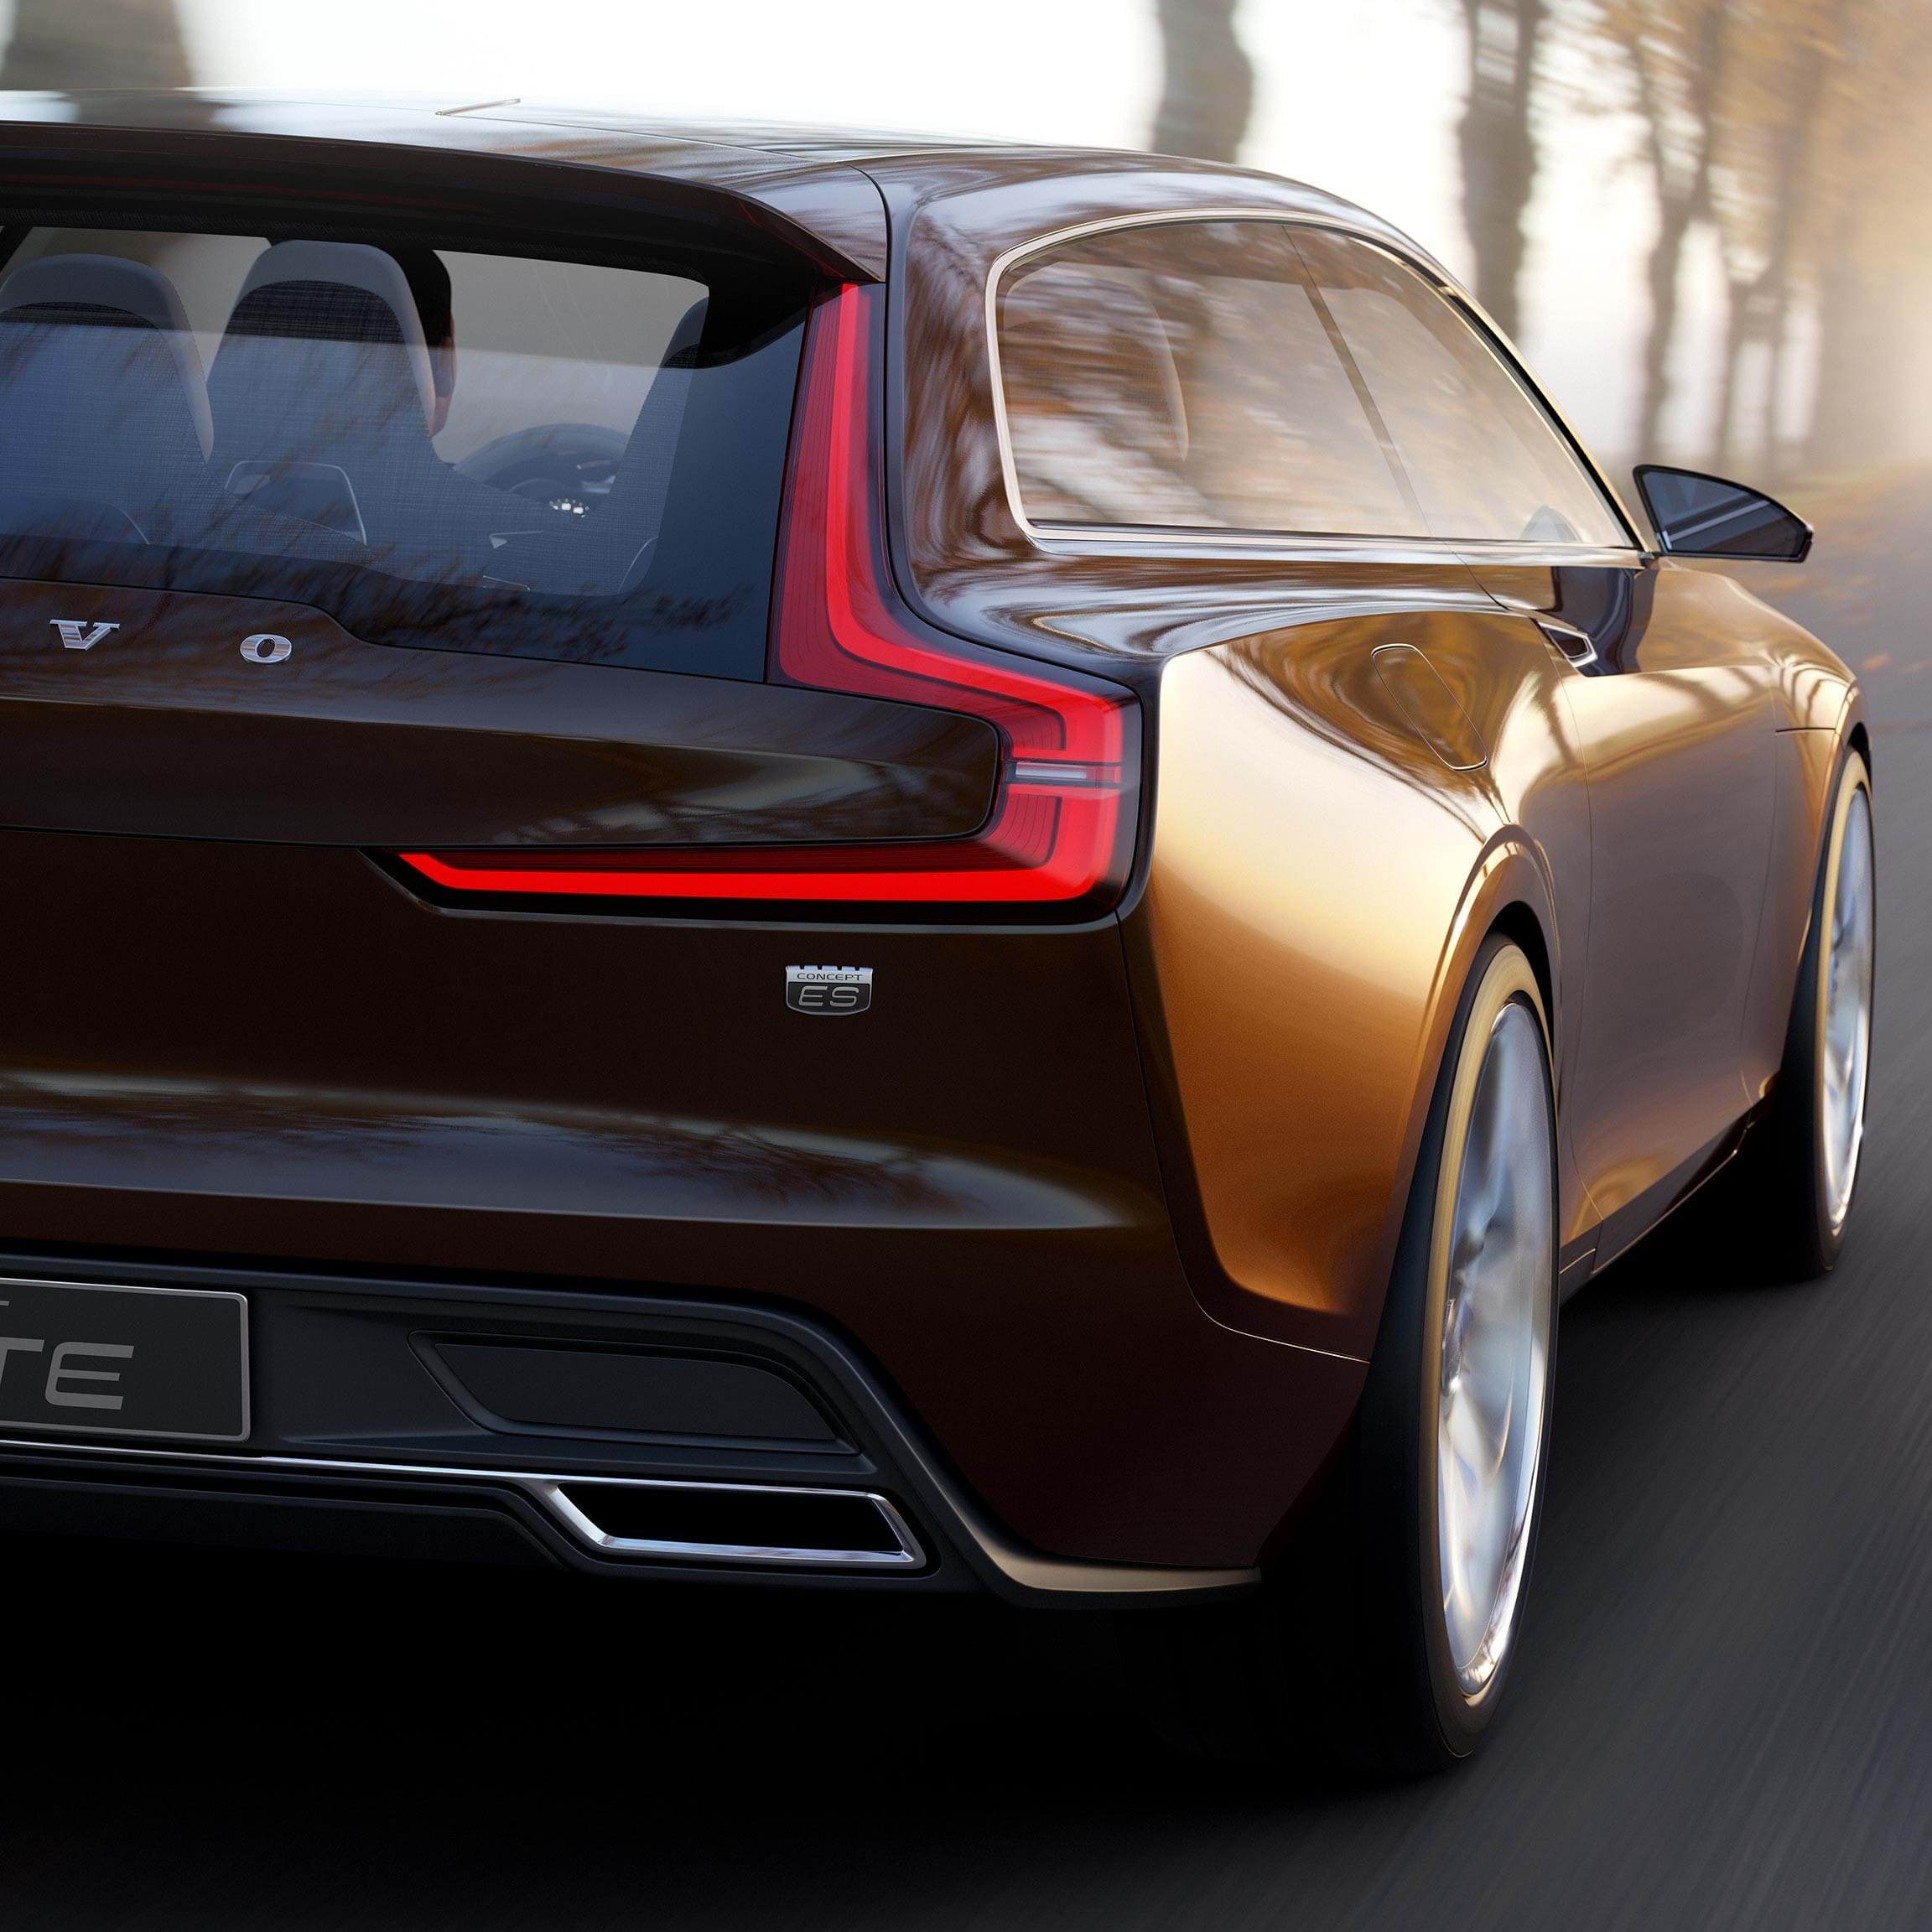 Volvo Concept Estate driving up tree-lined lane seen from rear